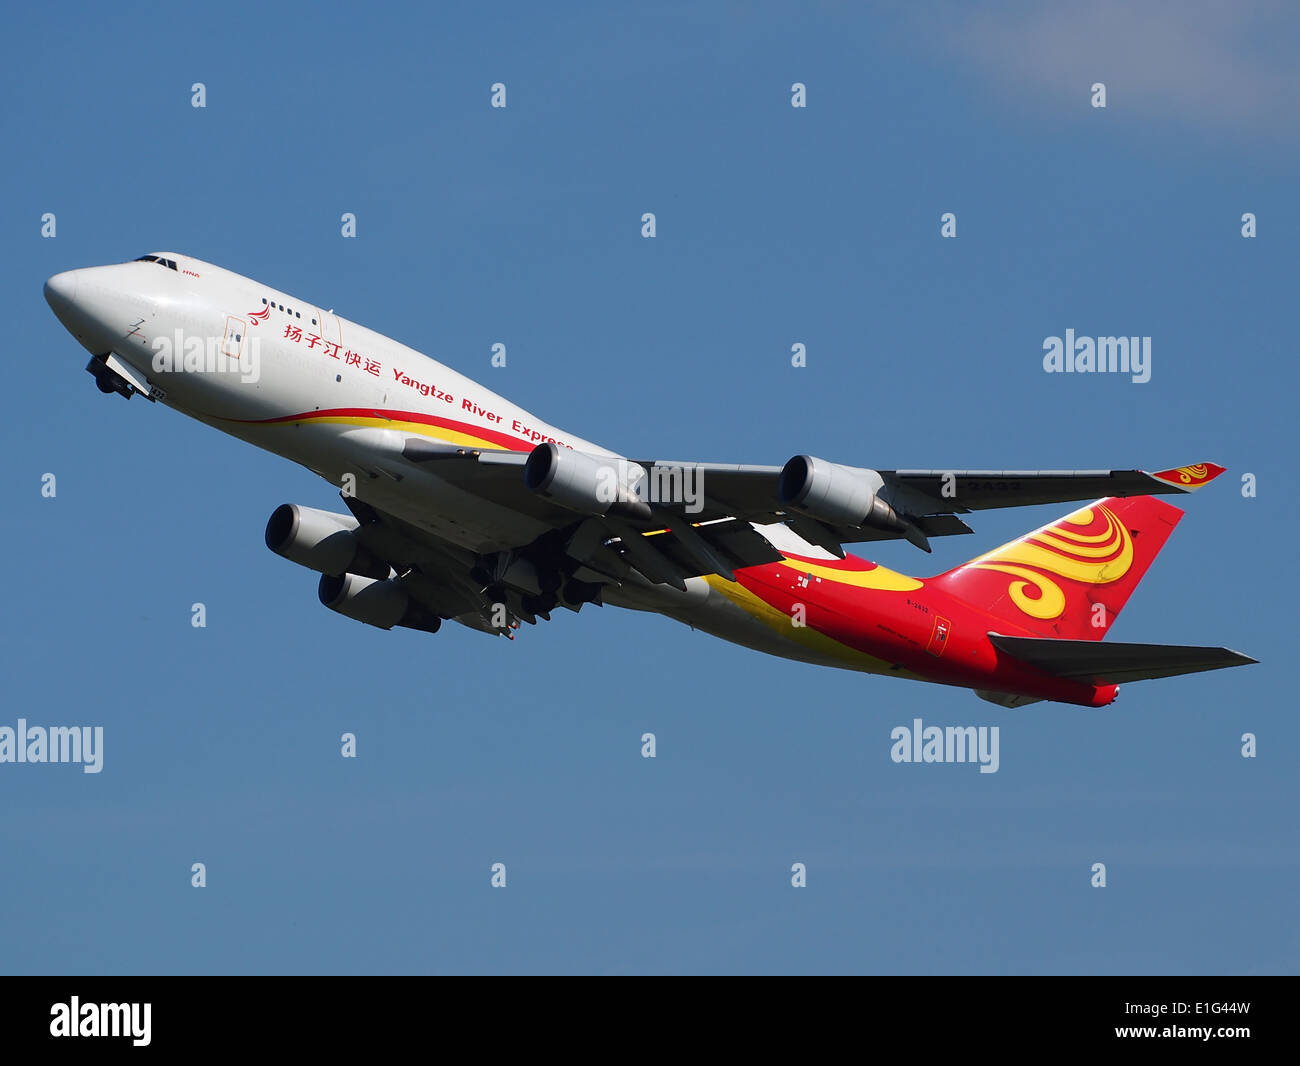 B-2432 Yangtze River Express Boeing 747-481(BDSF) at Schiphol (AMS - EHAM), The Netherlands, 16may2014, pic-3 Stock Photo